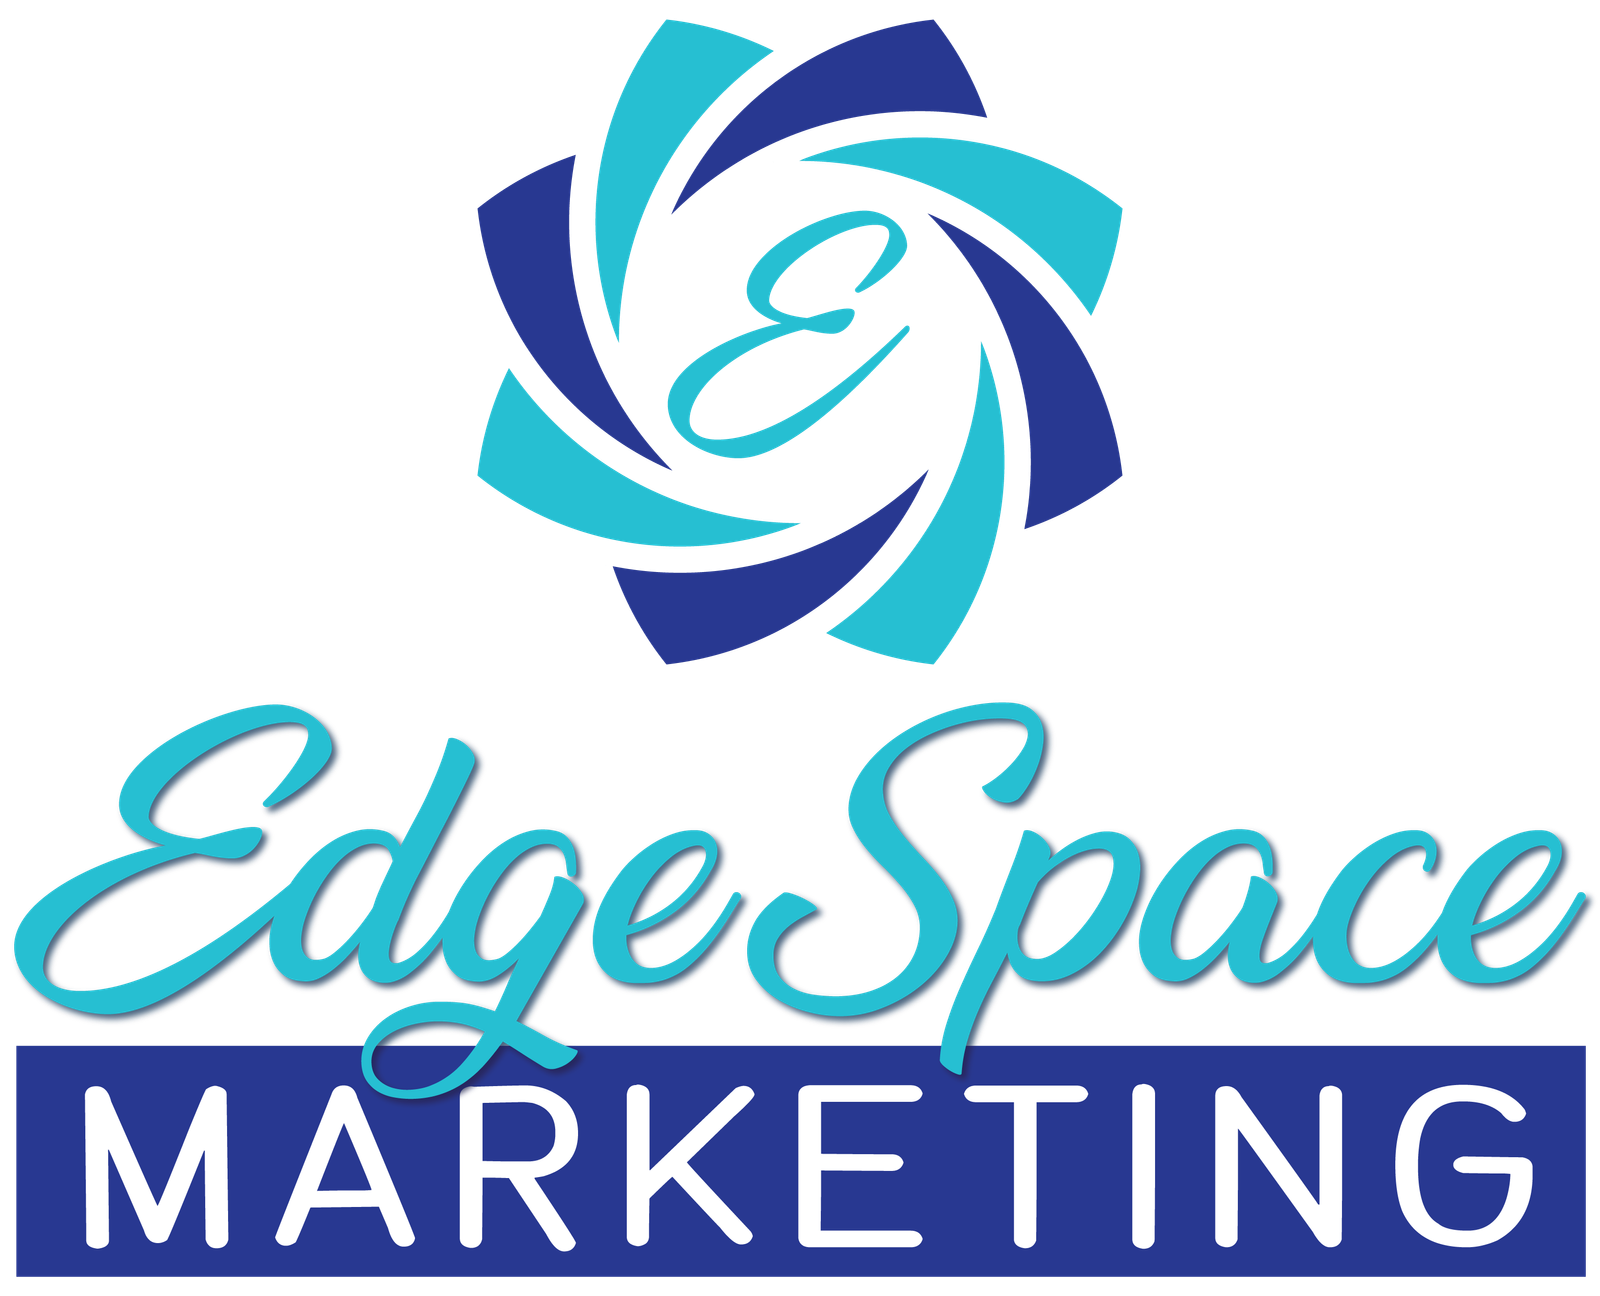 EdgeSpace-Marketing-Full-Color-Stacked-Logo.png